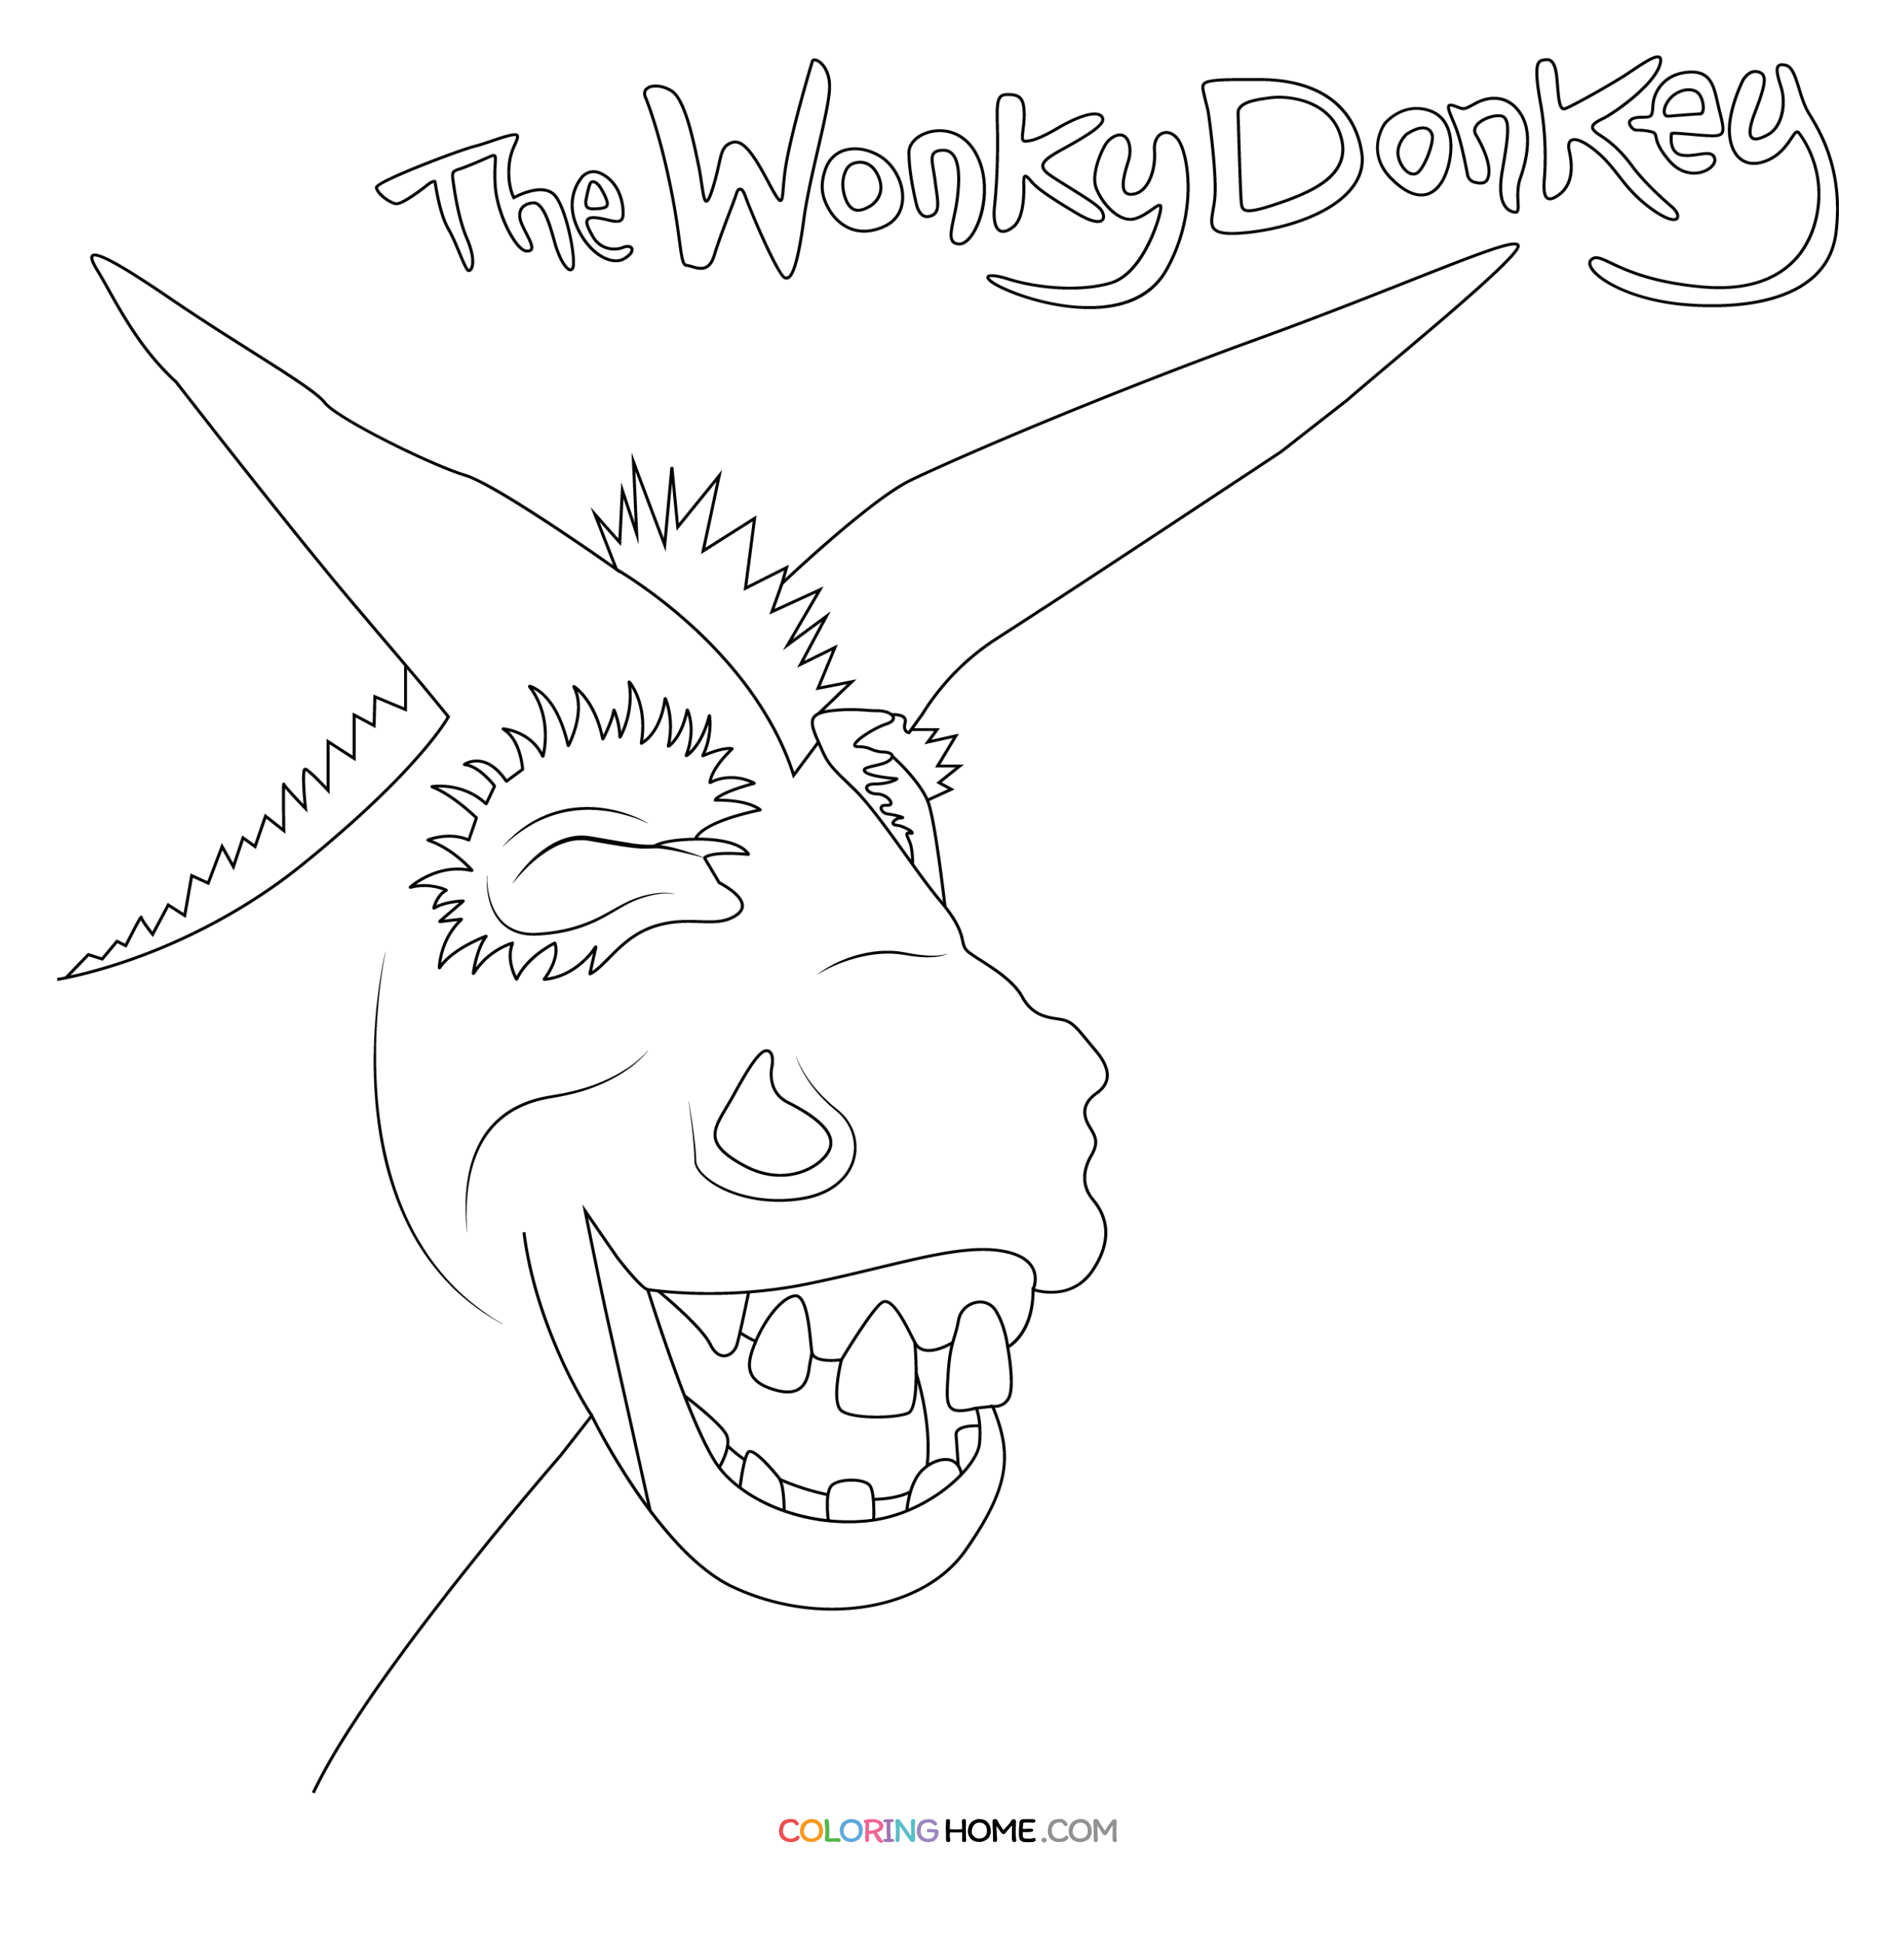 The Wonky Donkey book coloring page